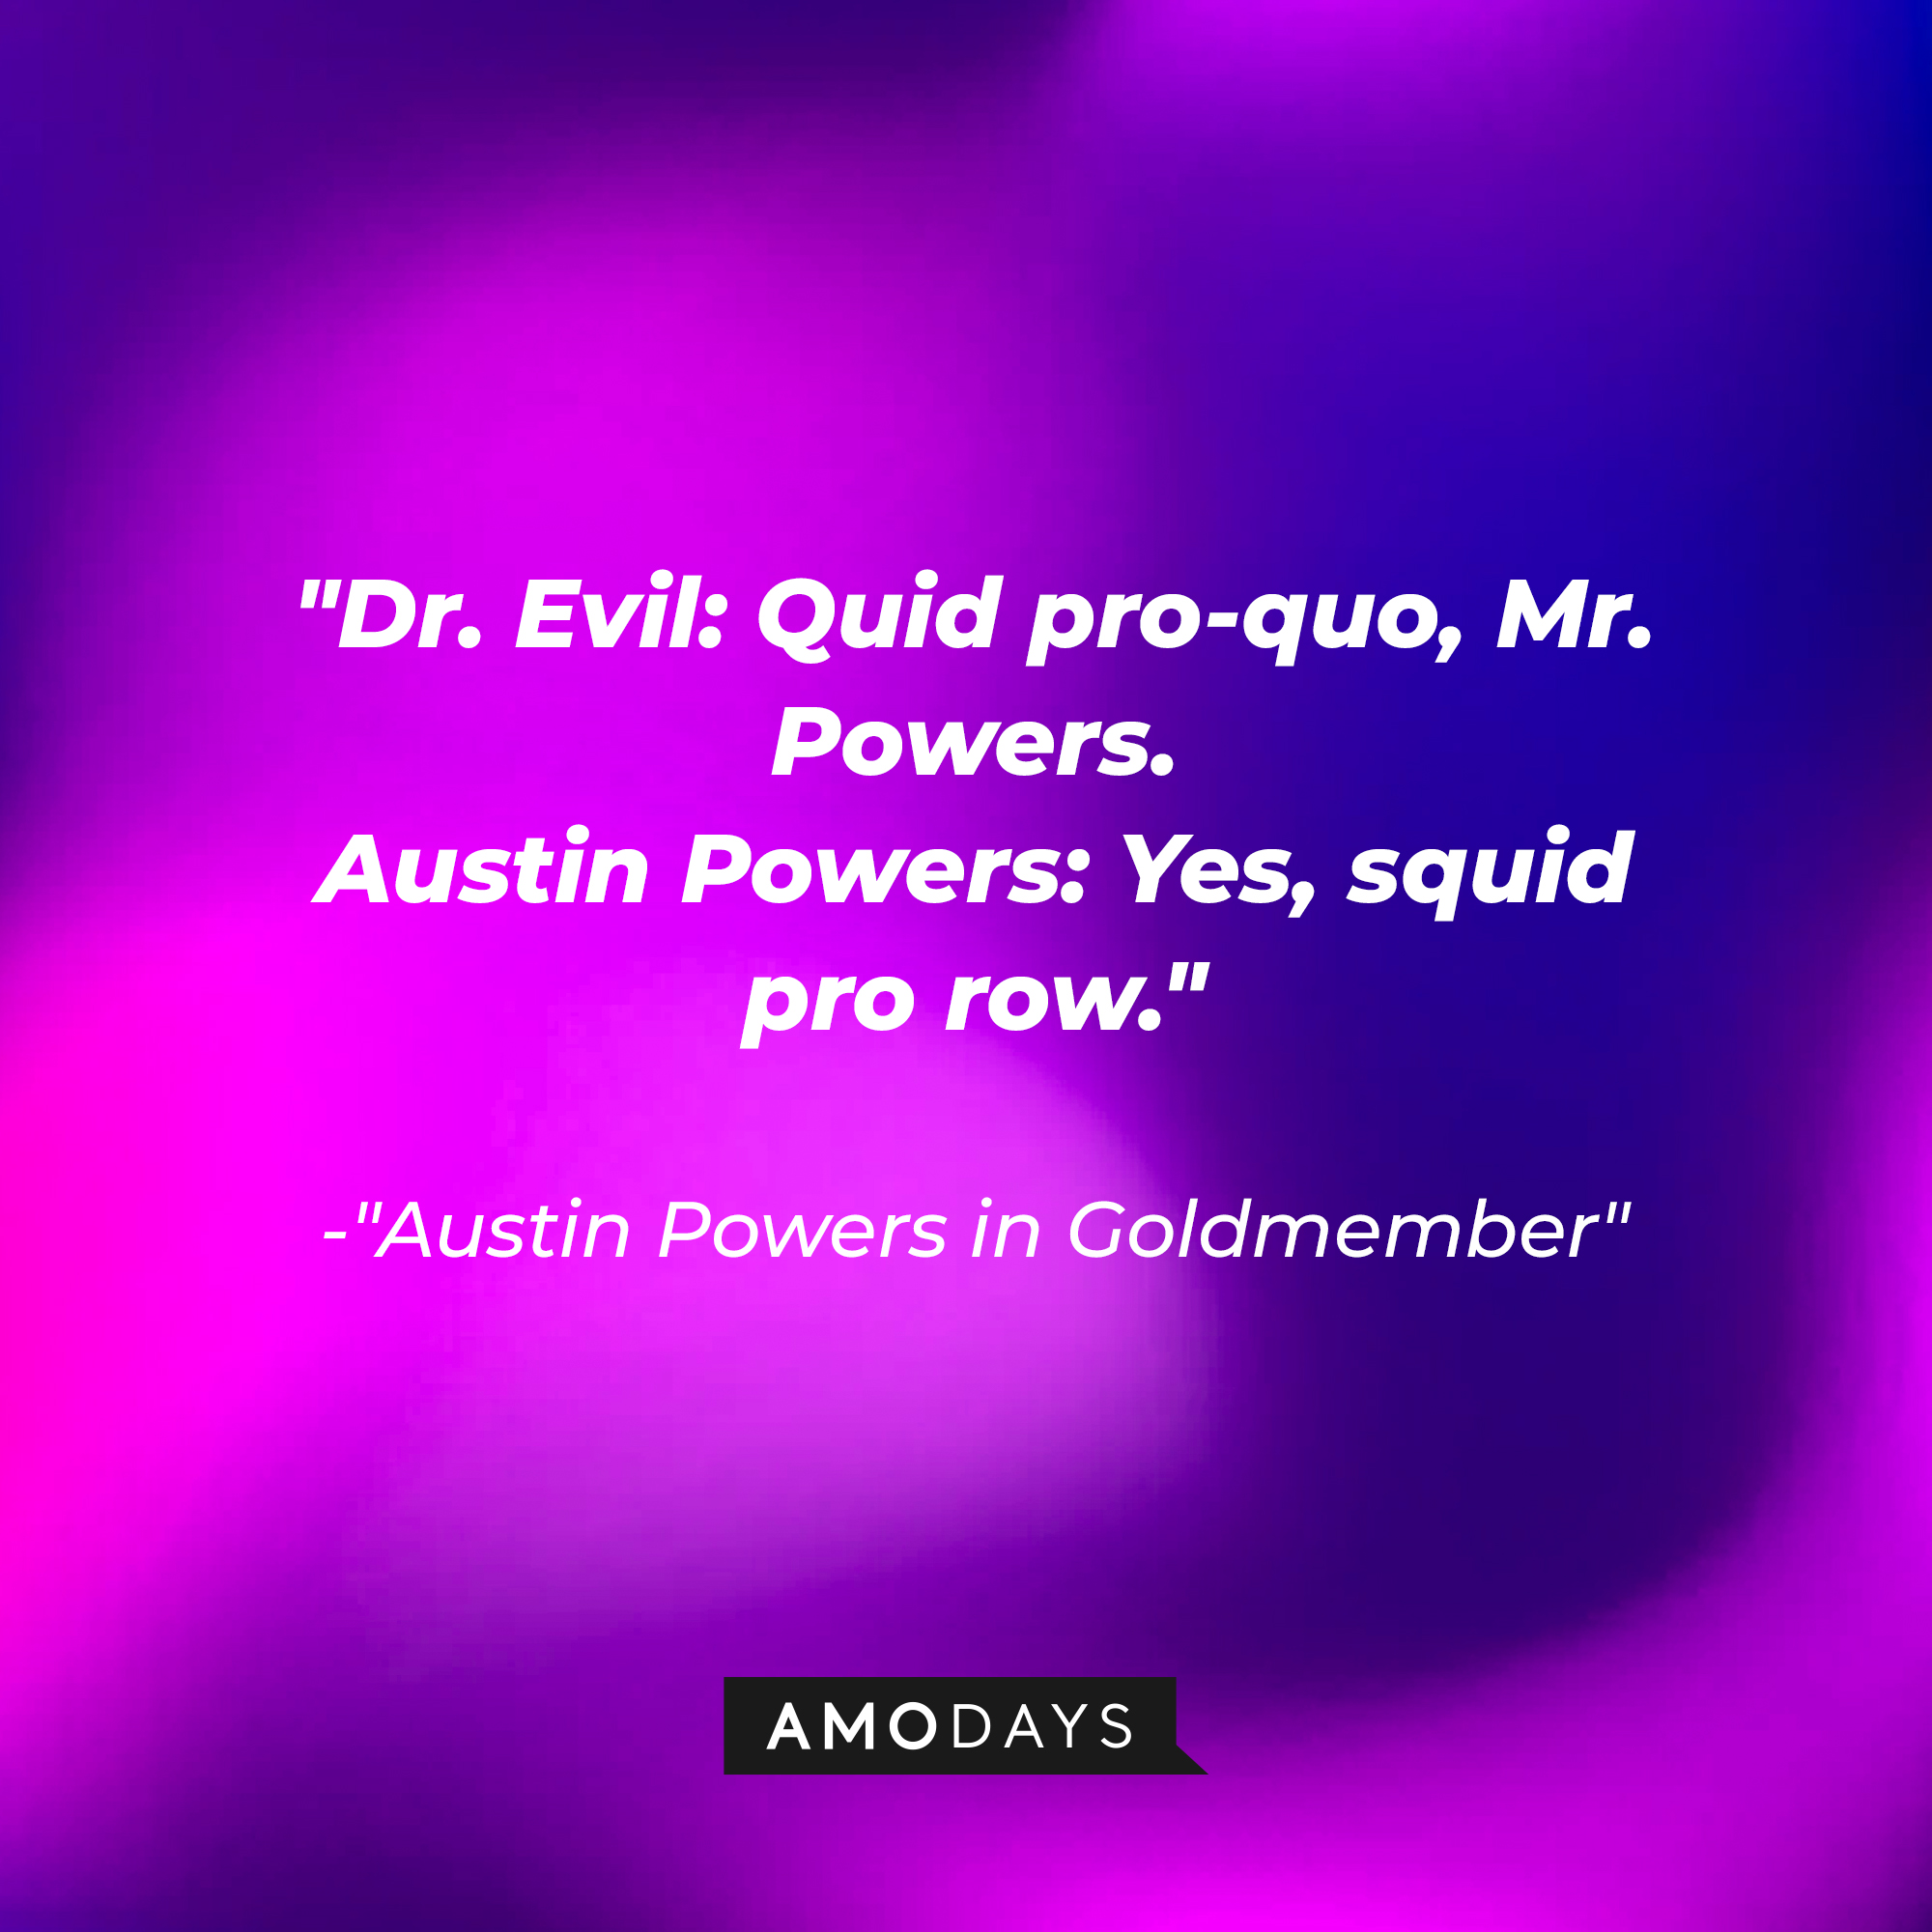 Dialogue from "Austin Powers in Goldmember": "Dr. Evil: Quid pro-quo, Mr. Powers. Austin Powers: Yes, squid pro row." | Source: Amodays